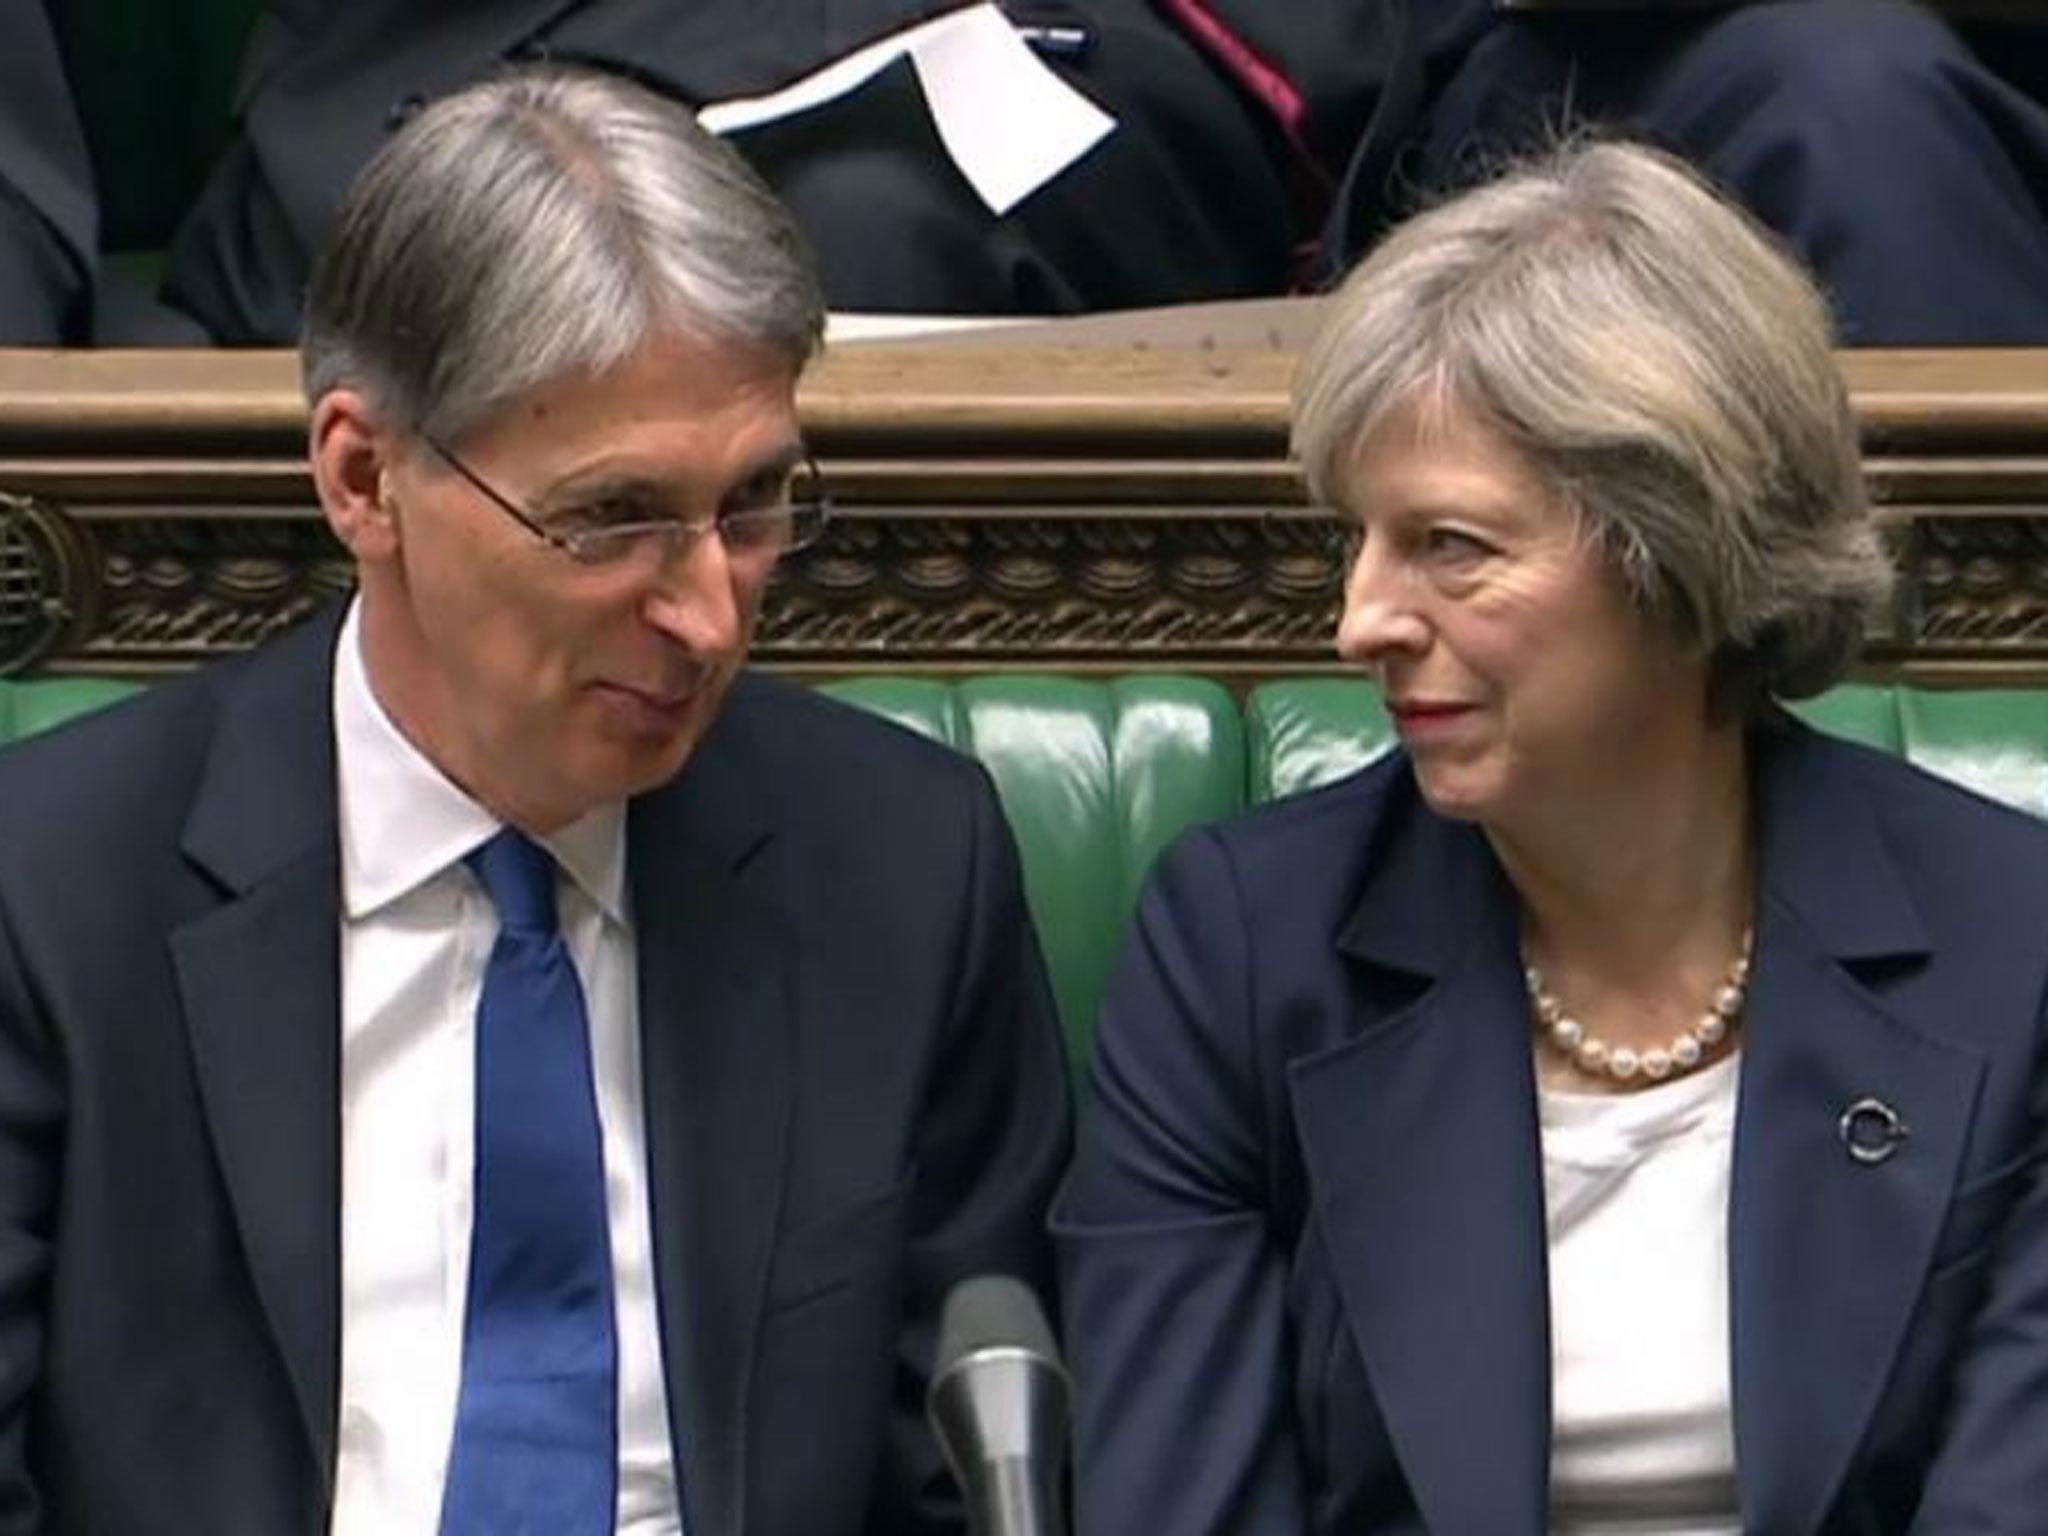 Unlike Cameron and Osborne before them, May and Hammond do not share a joint project